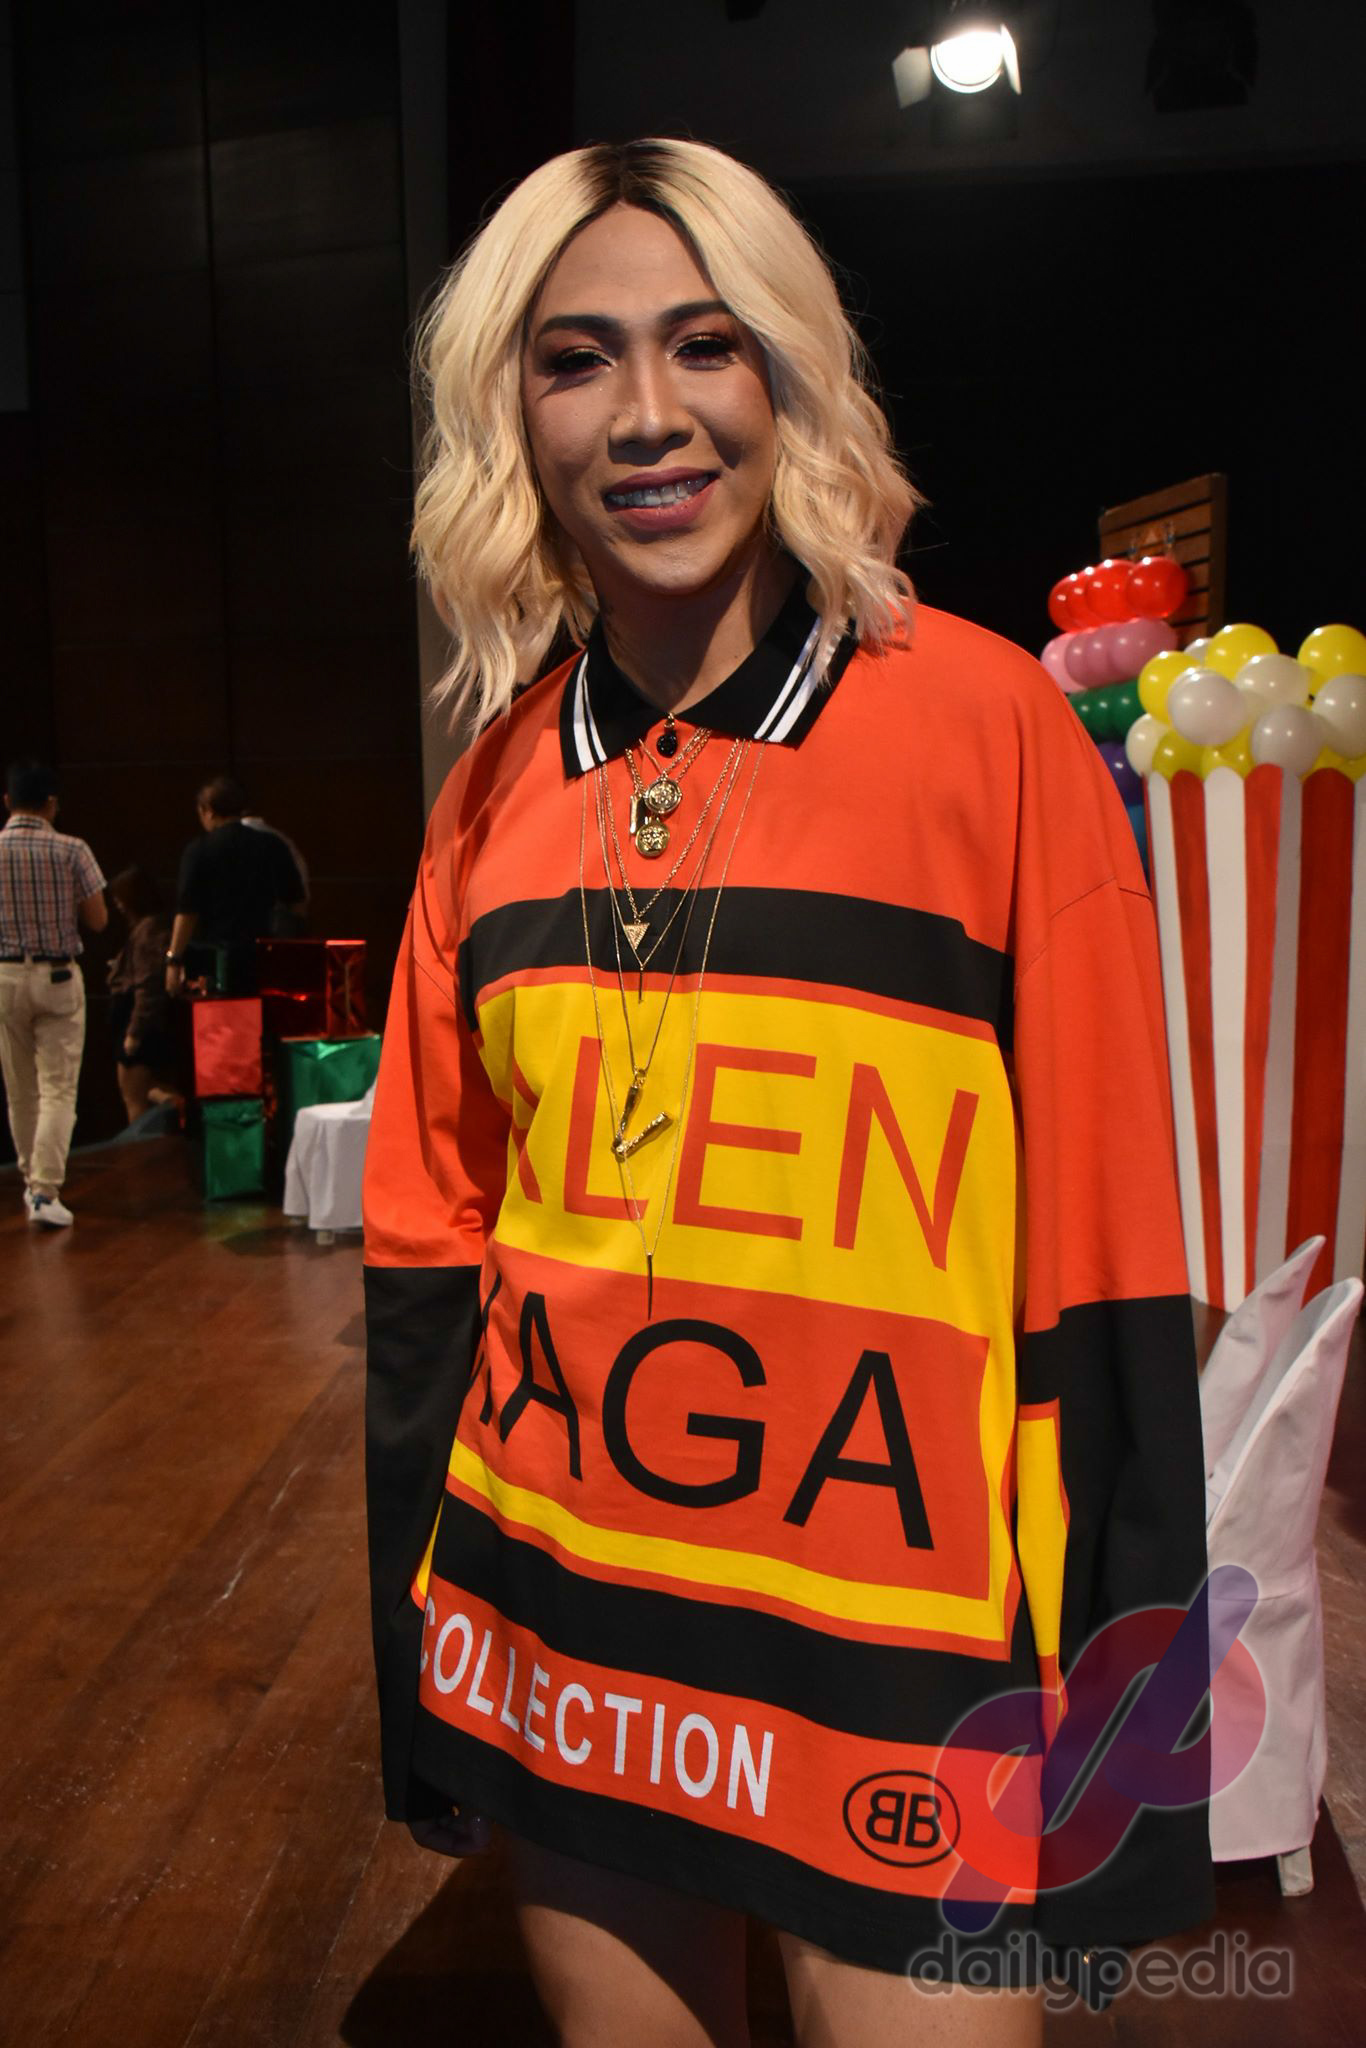 Vice Ganda vows to never be poor again